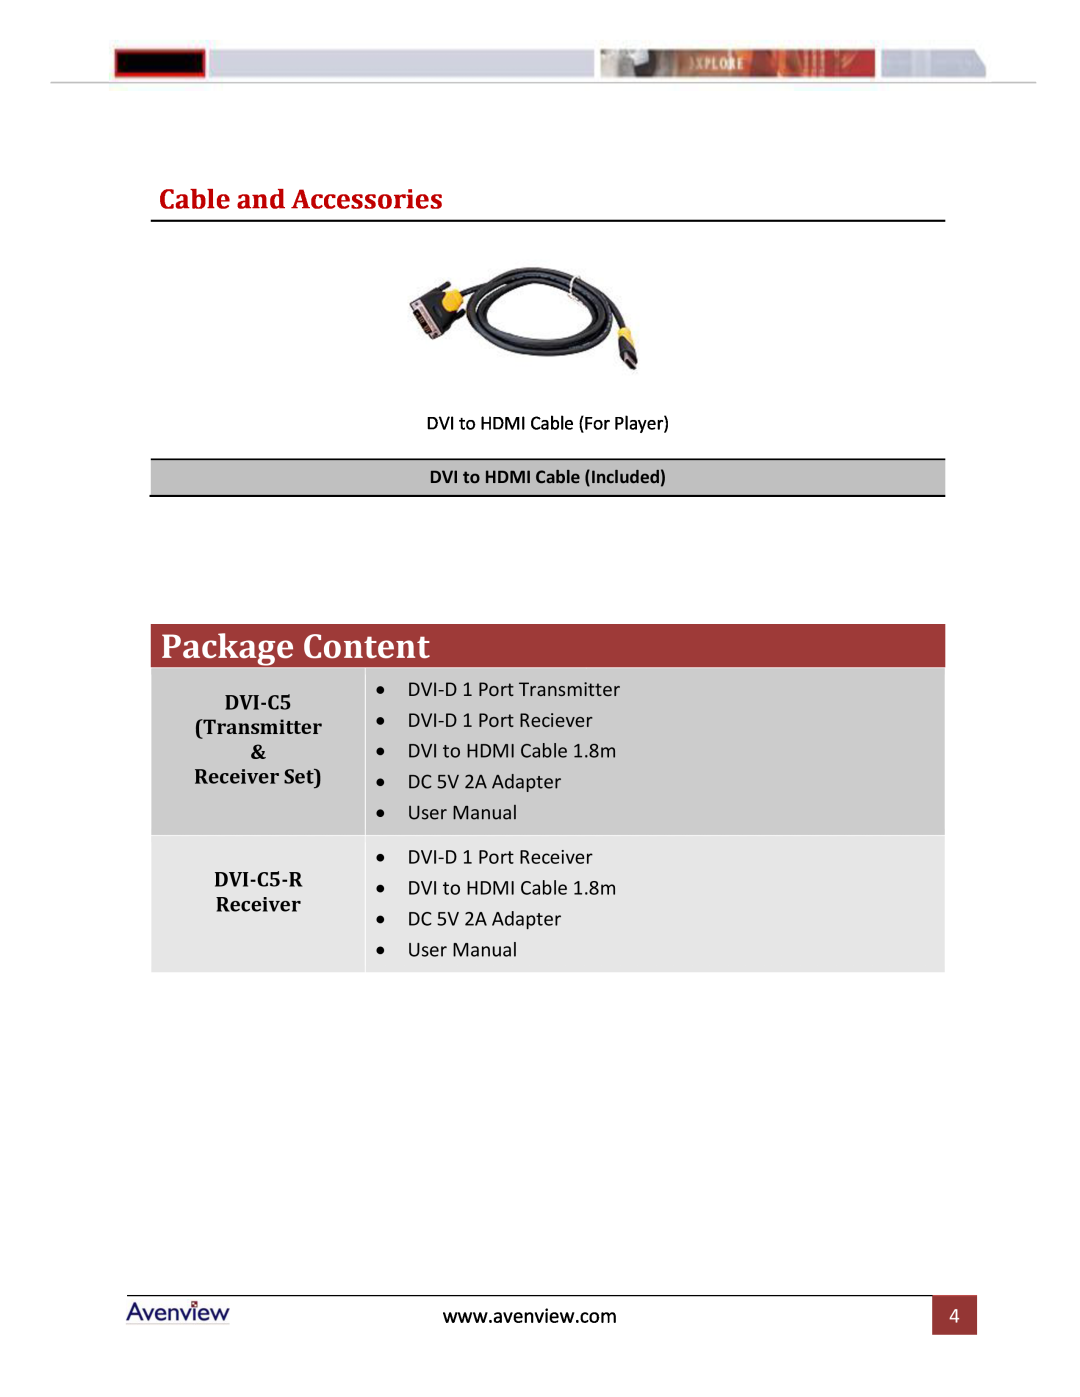 Avenview DVI-C5-S manual Package Content, Cable and Accessories, Transmitter, Receiver Set, DVI-C5-R 